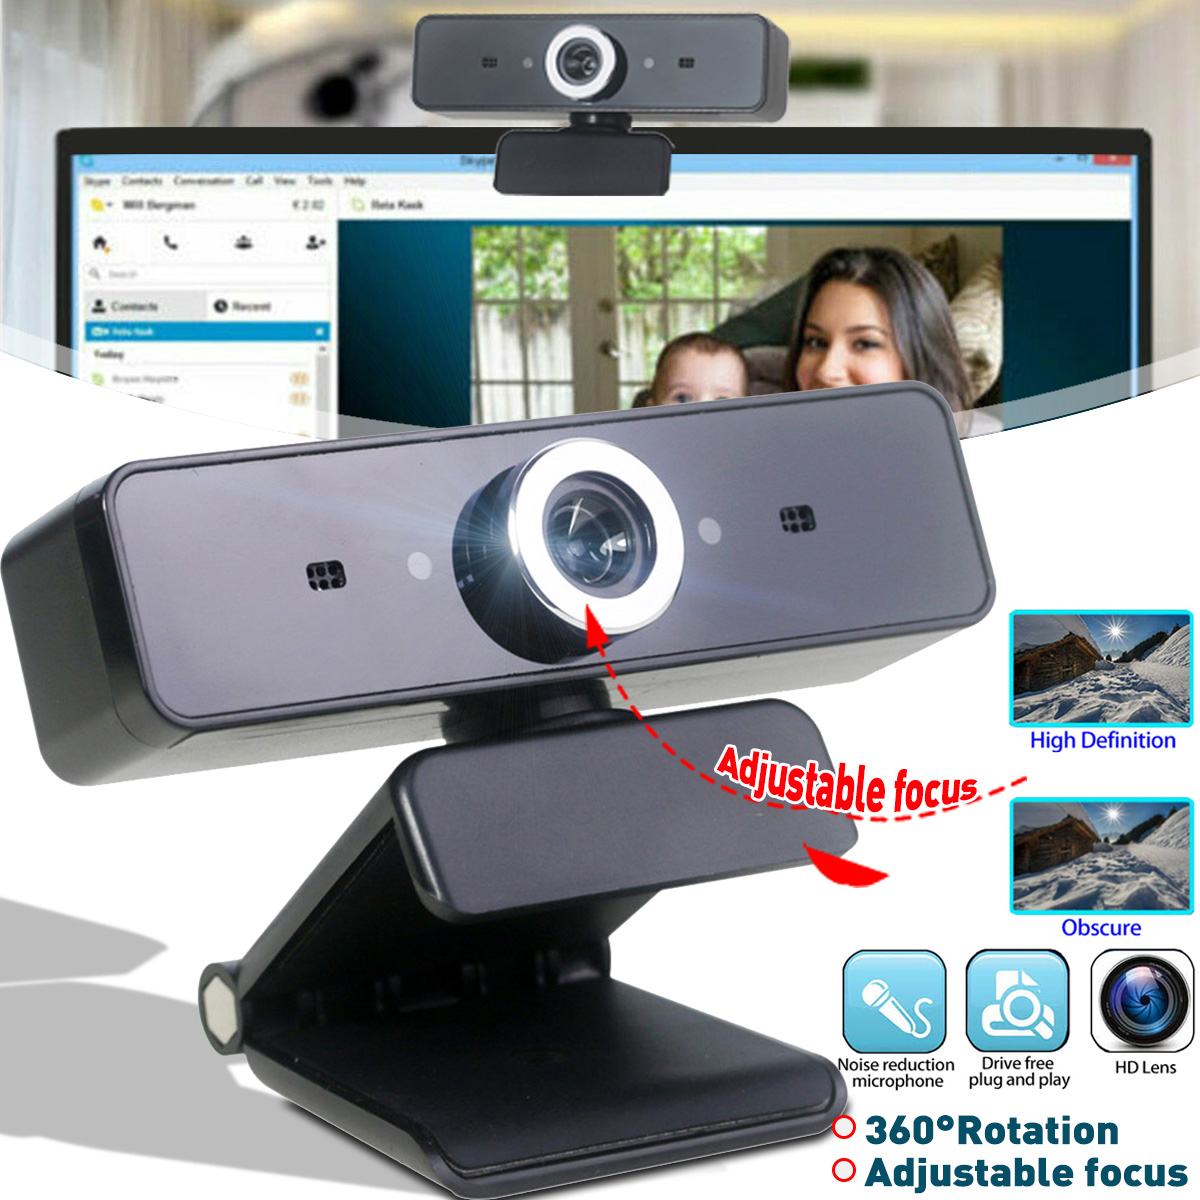 Avanc HD 720P USB Webcam with Microphone for PC Laptop